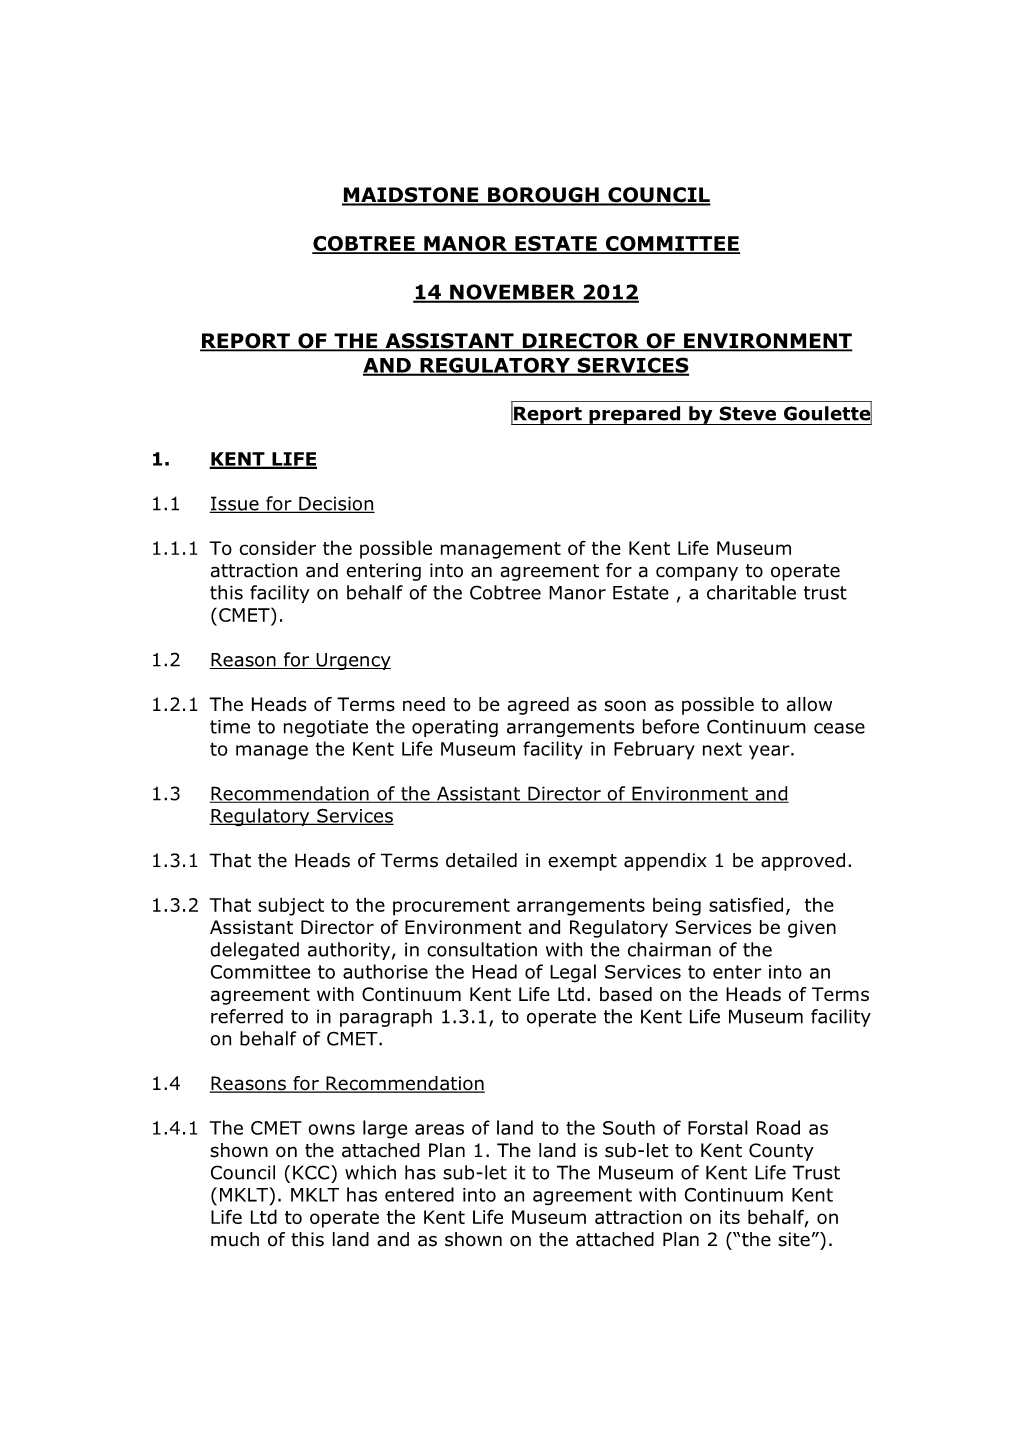 Maidstone Borough Council Cobtree Manor Estate Committee 14 November 2012 Report of the Assistant Director of Environment and Re